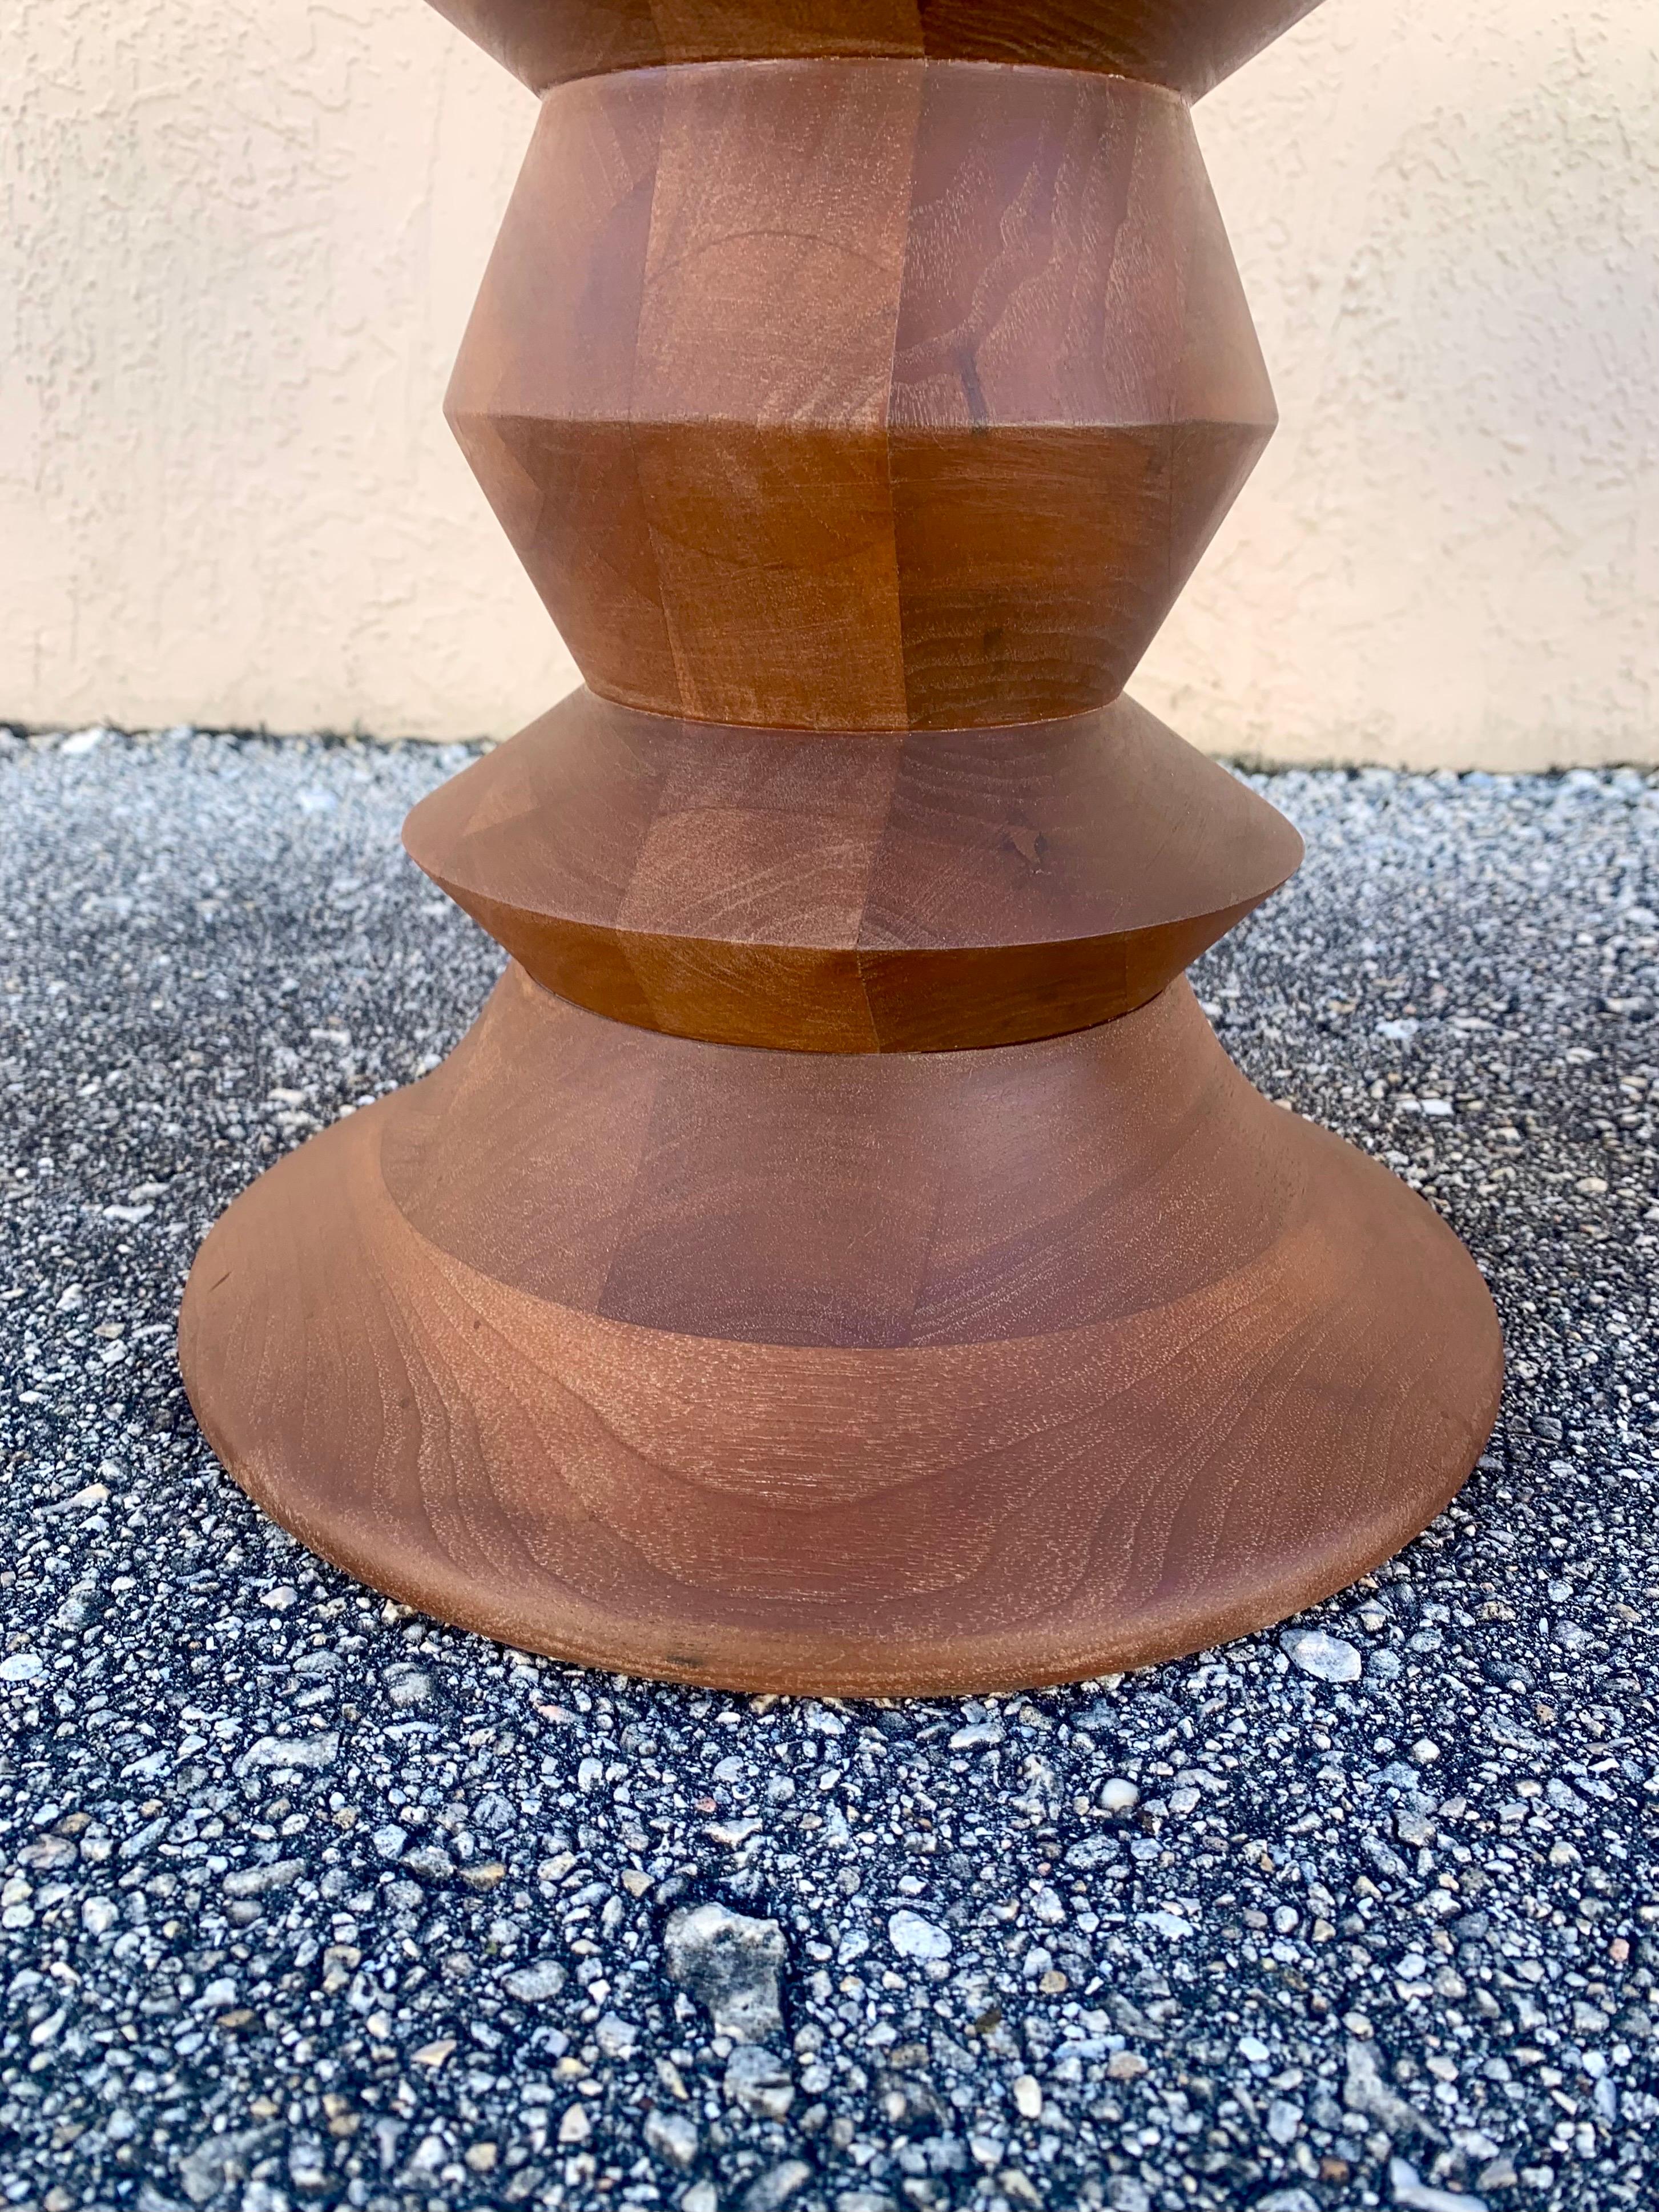 Early example of a Time Life stool by Charles and Ray Eames. Influenced by Rays background as a sculptor. Designed in the 1960s for the Time Life building. This is a very early example sources by a collector in Miami. Has been refinished but still